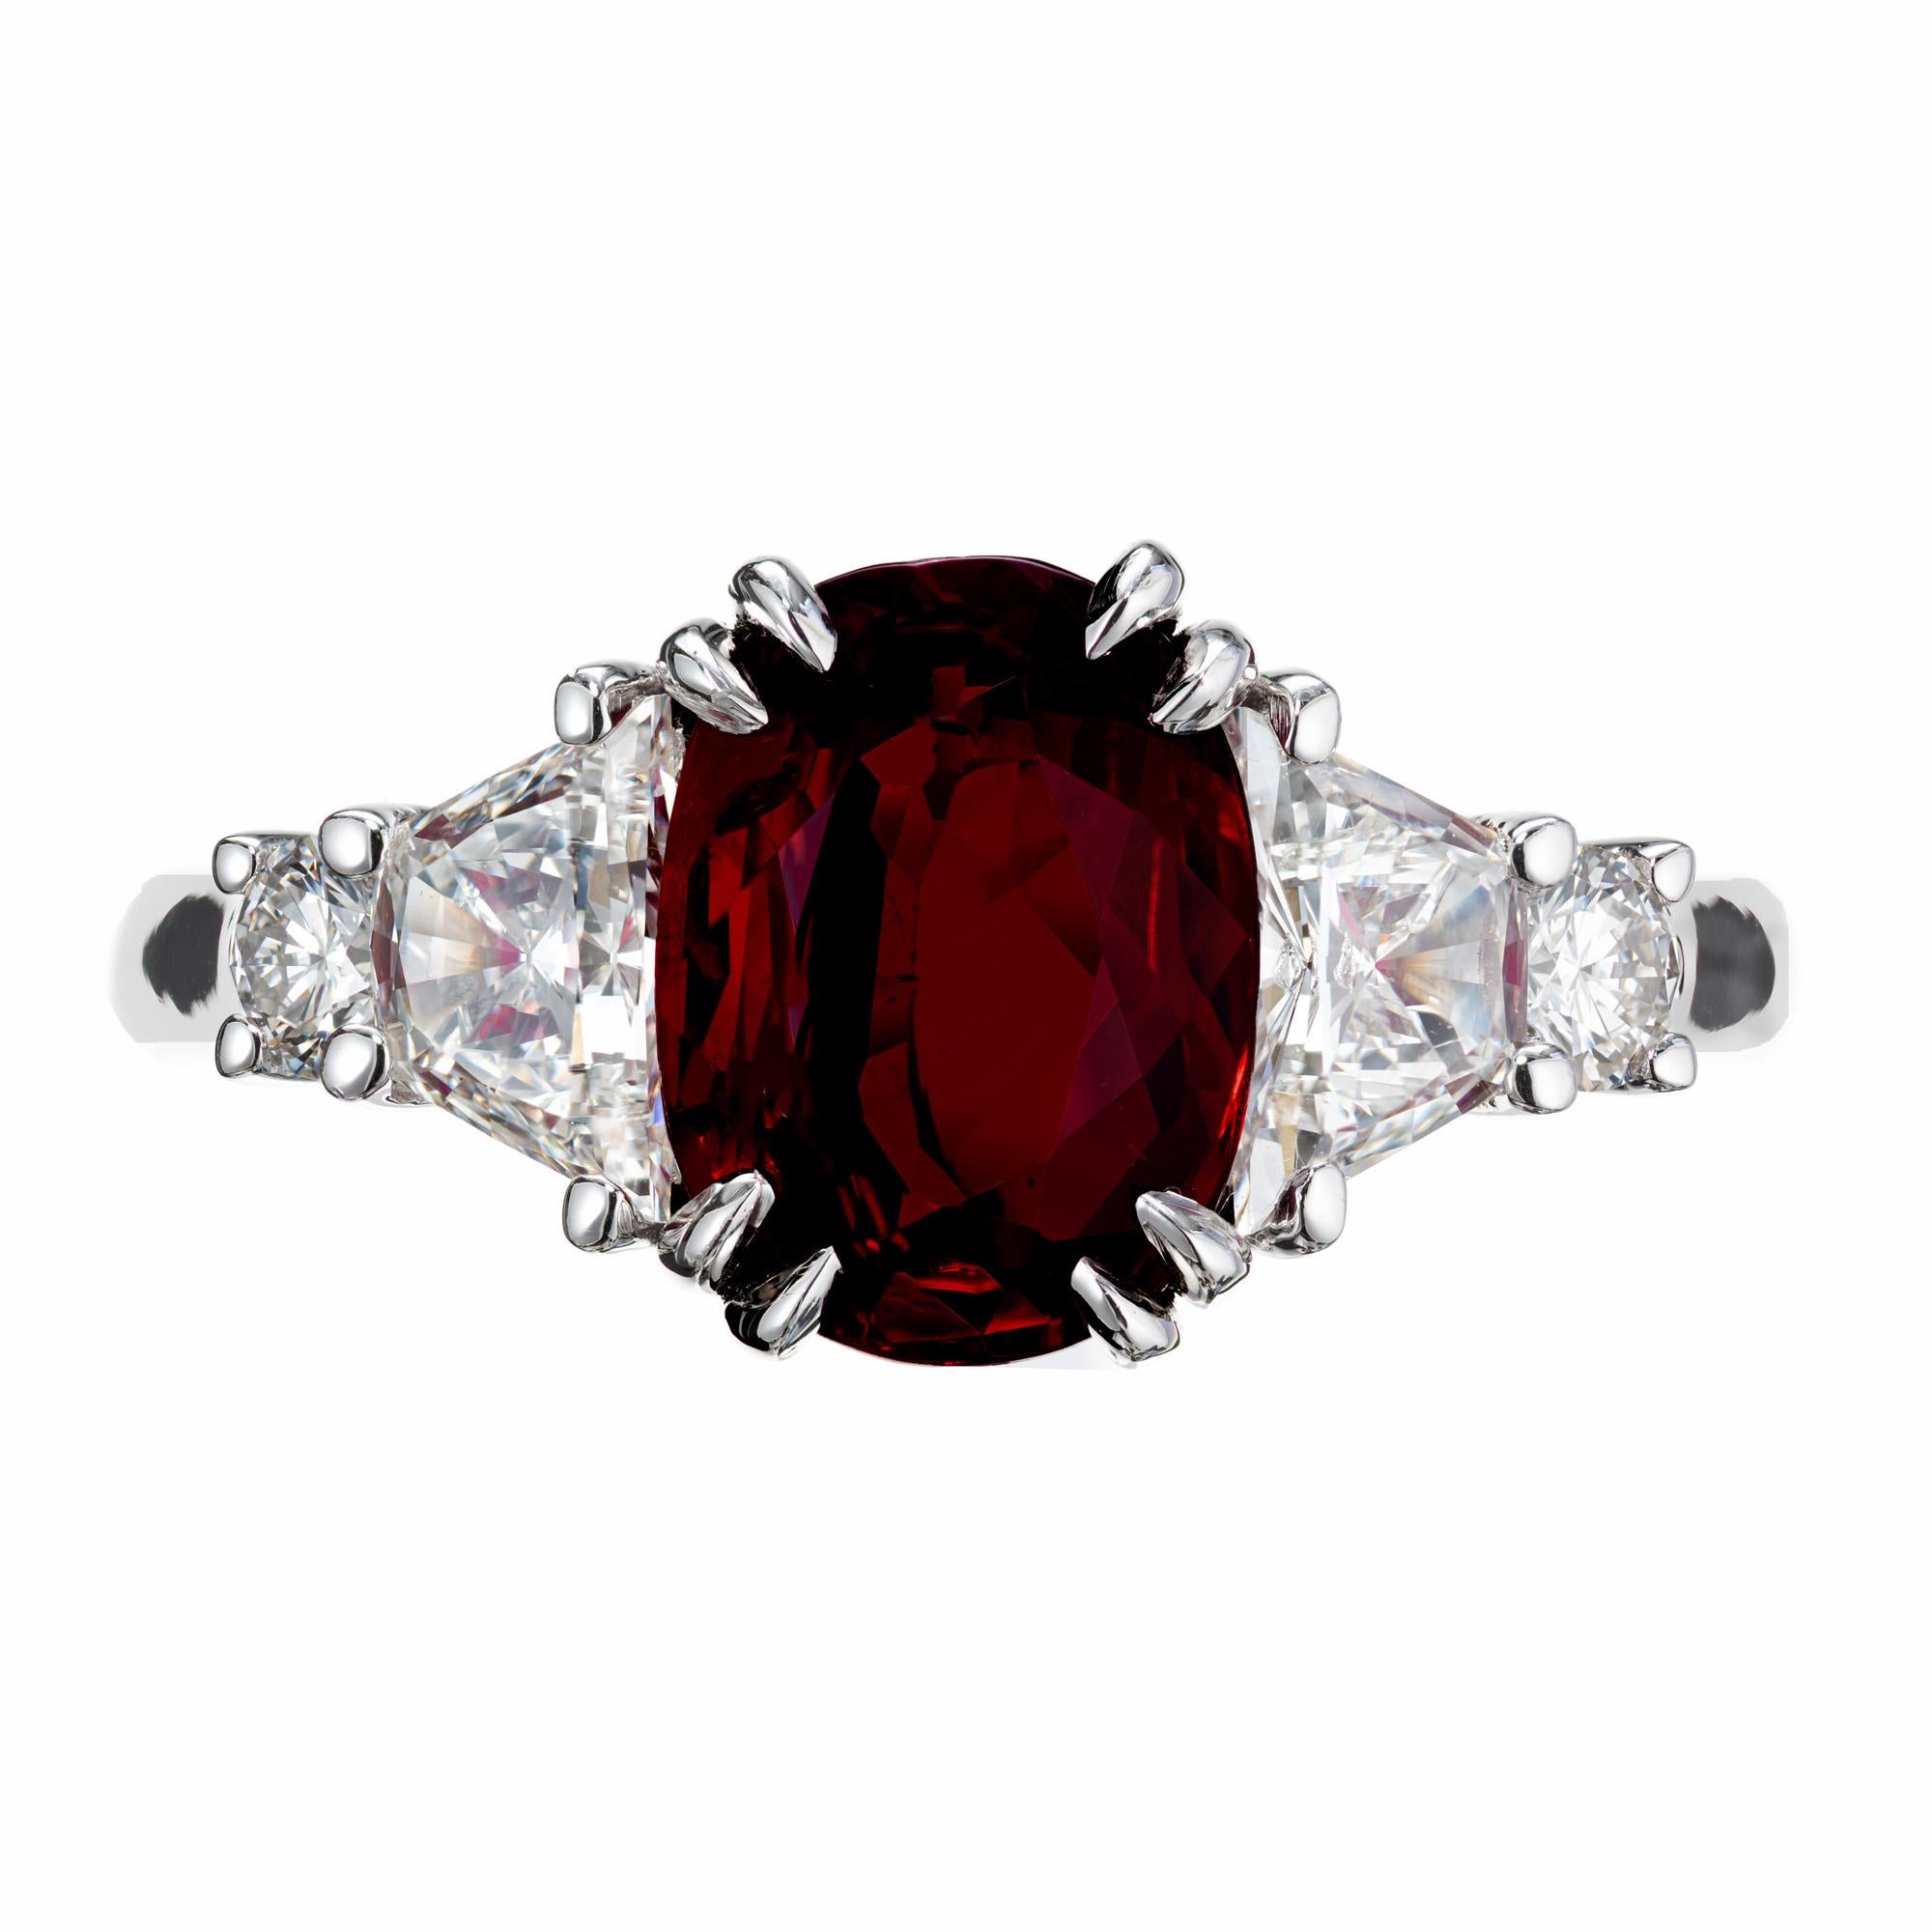 Ruby and diamond engagement ring. GIA certified crimson red oval 2.96ct Ruby set in a platinum 8 prong setting, accented by two brilliant cut trapezoid and full round cut diamonds. The GIA has certified this ruby as a natural with simple heat only.